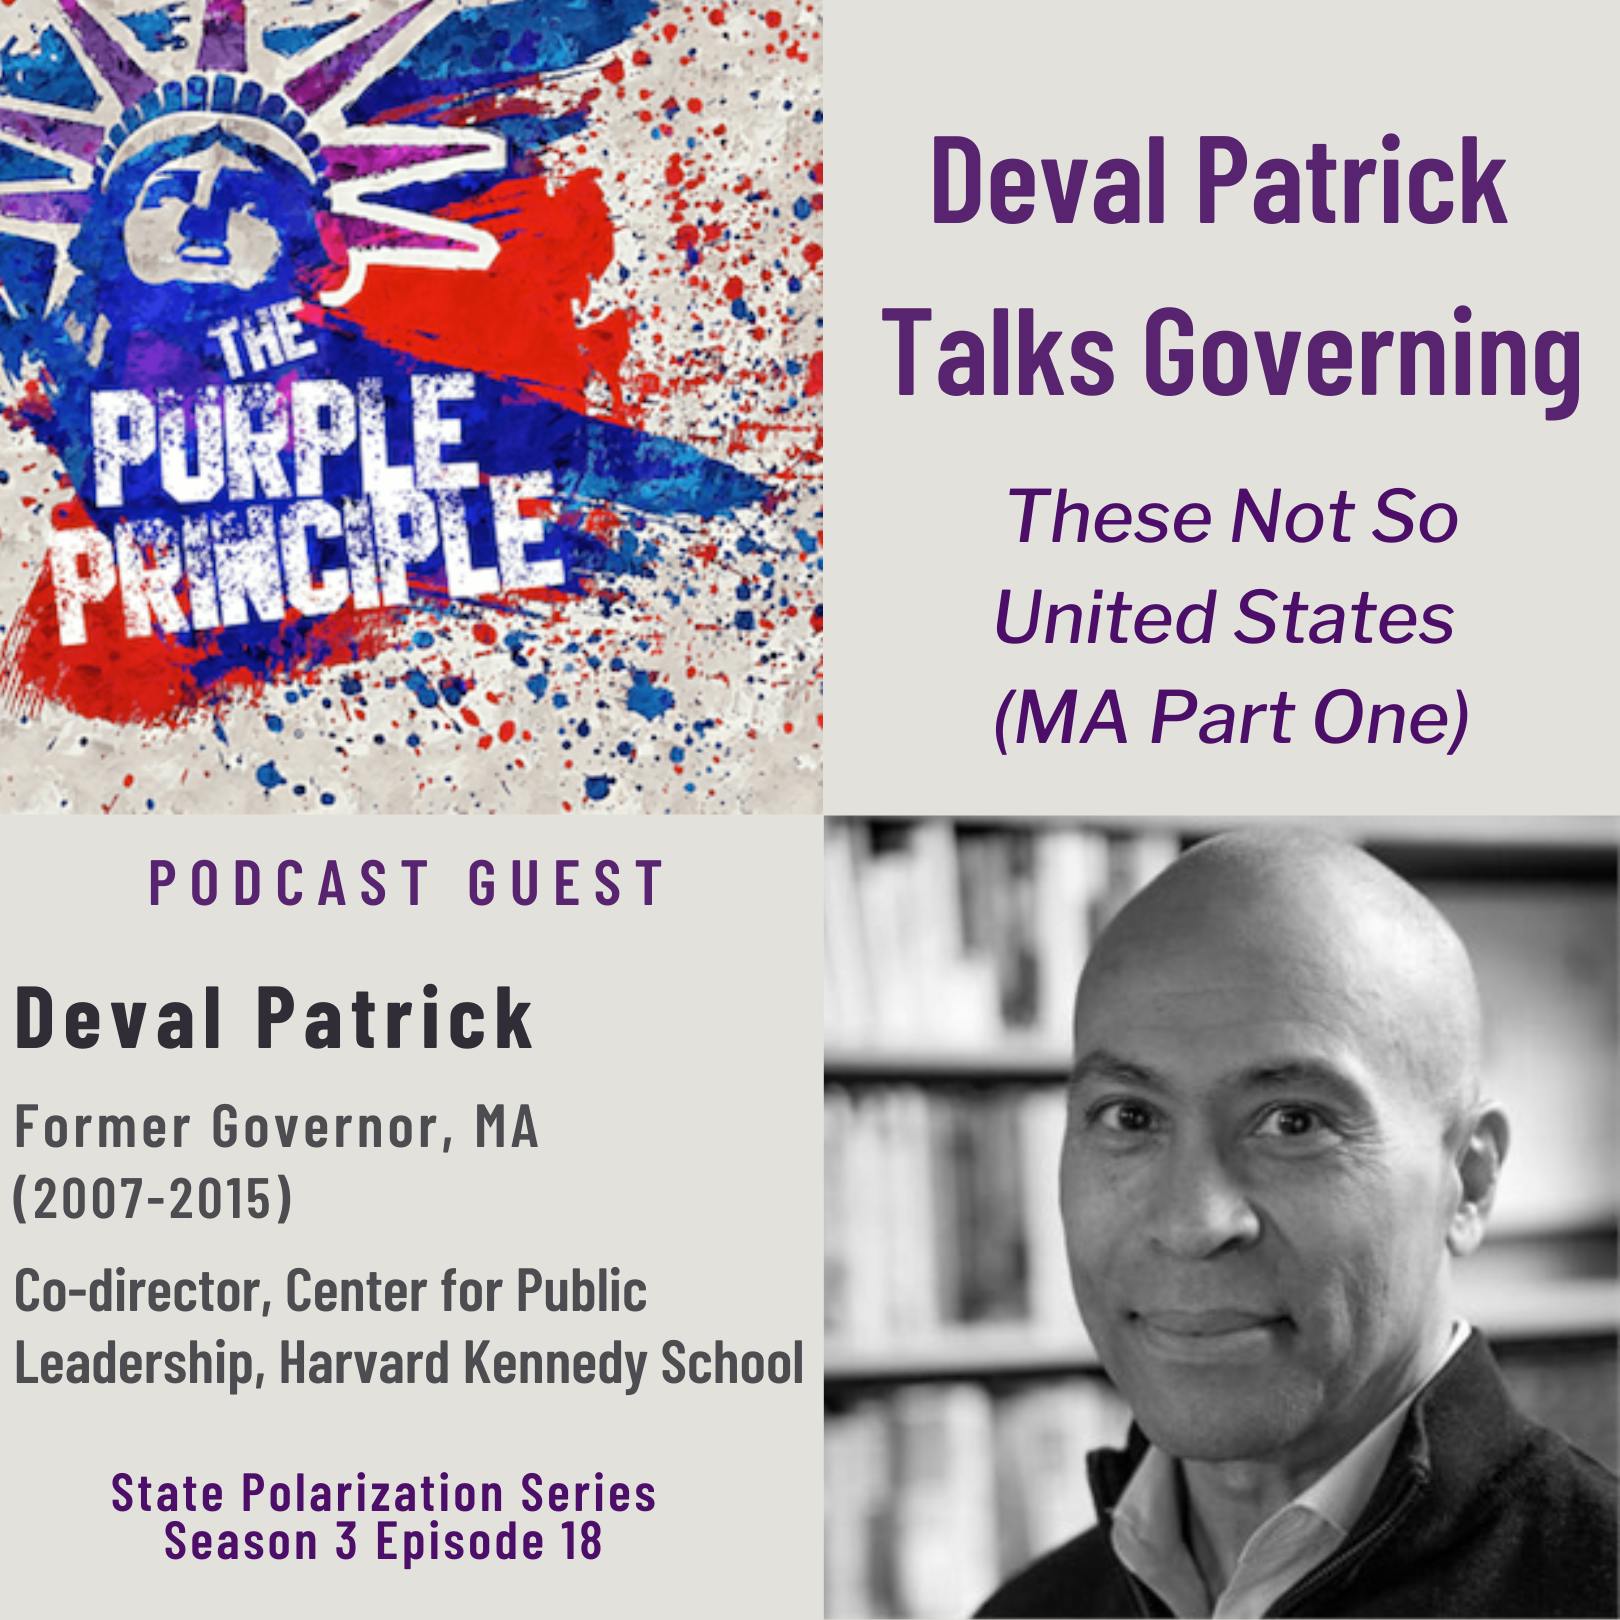 Deval Patrick Talks Governing: These Not So United States (MA Part One)